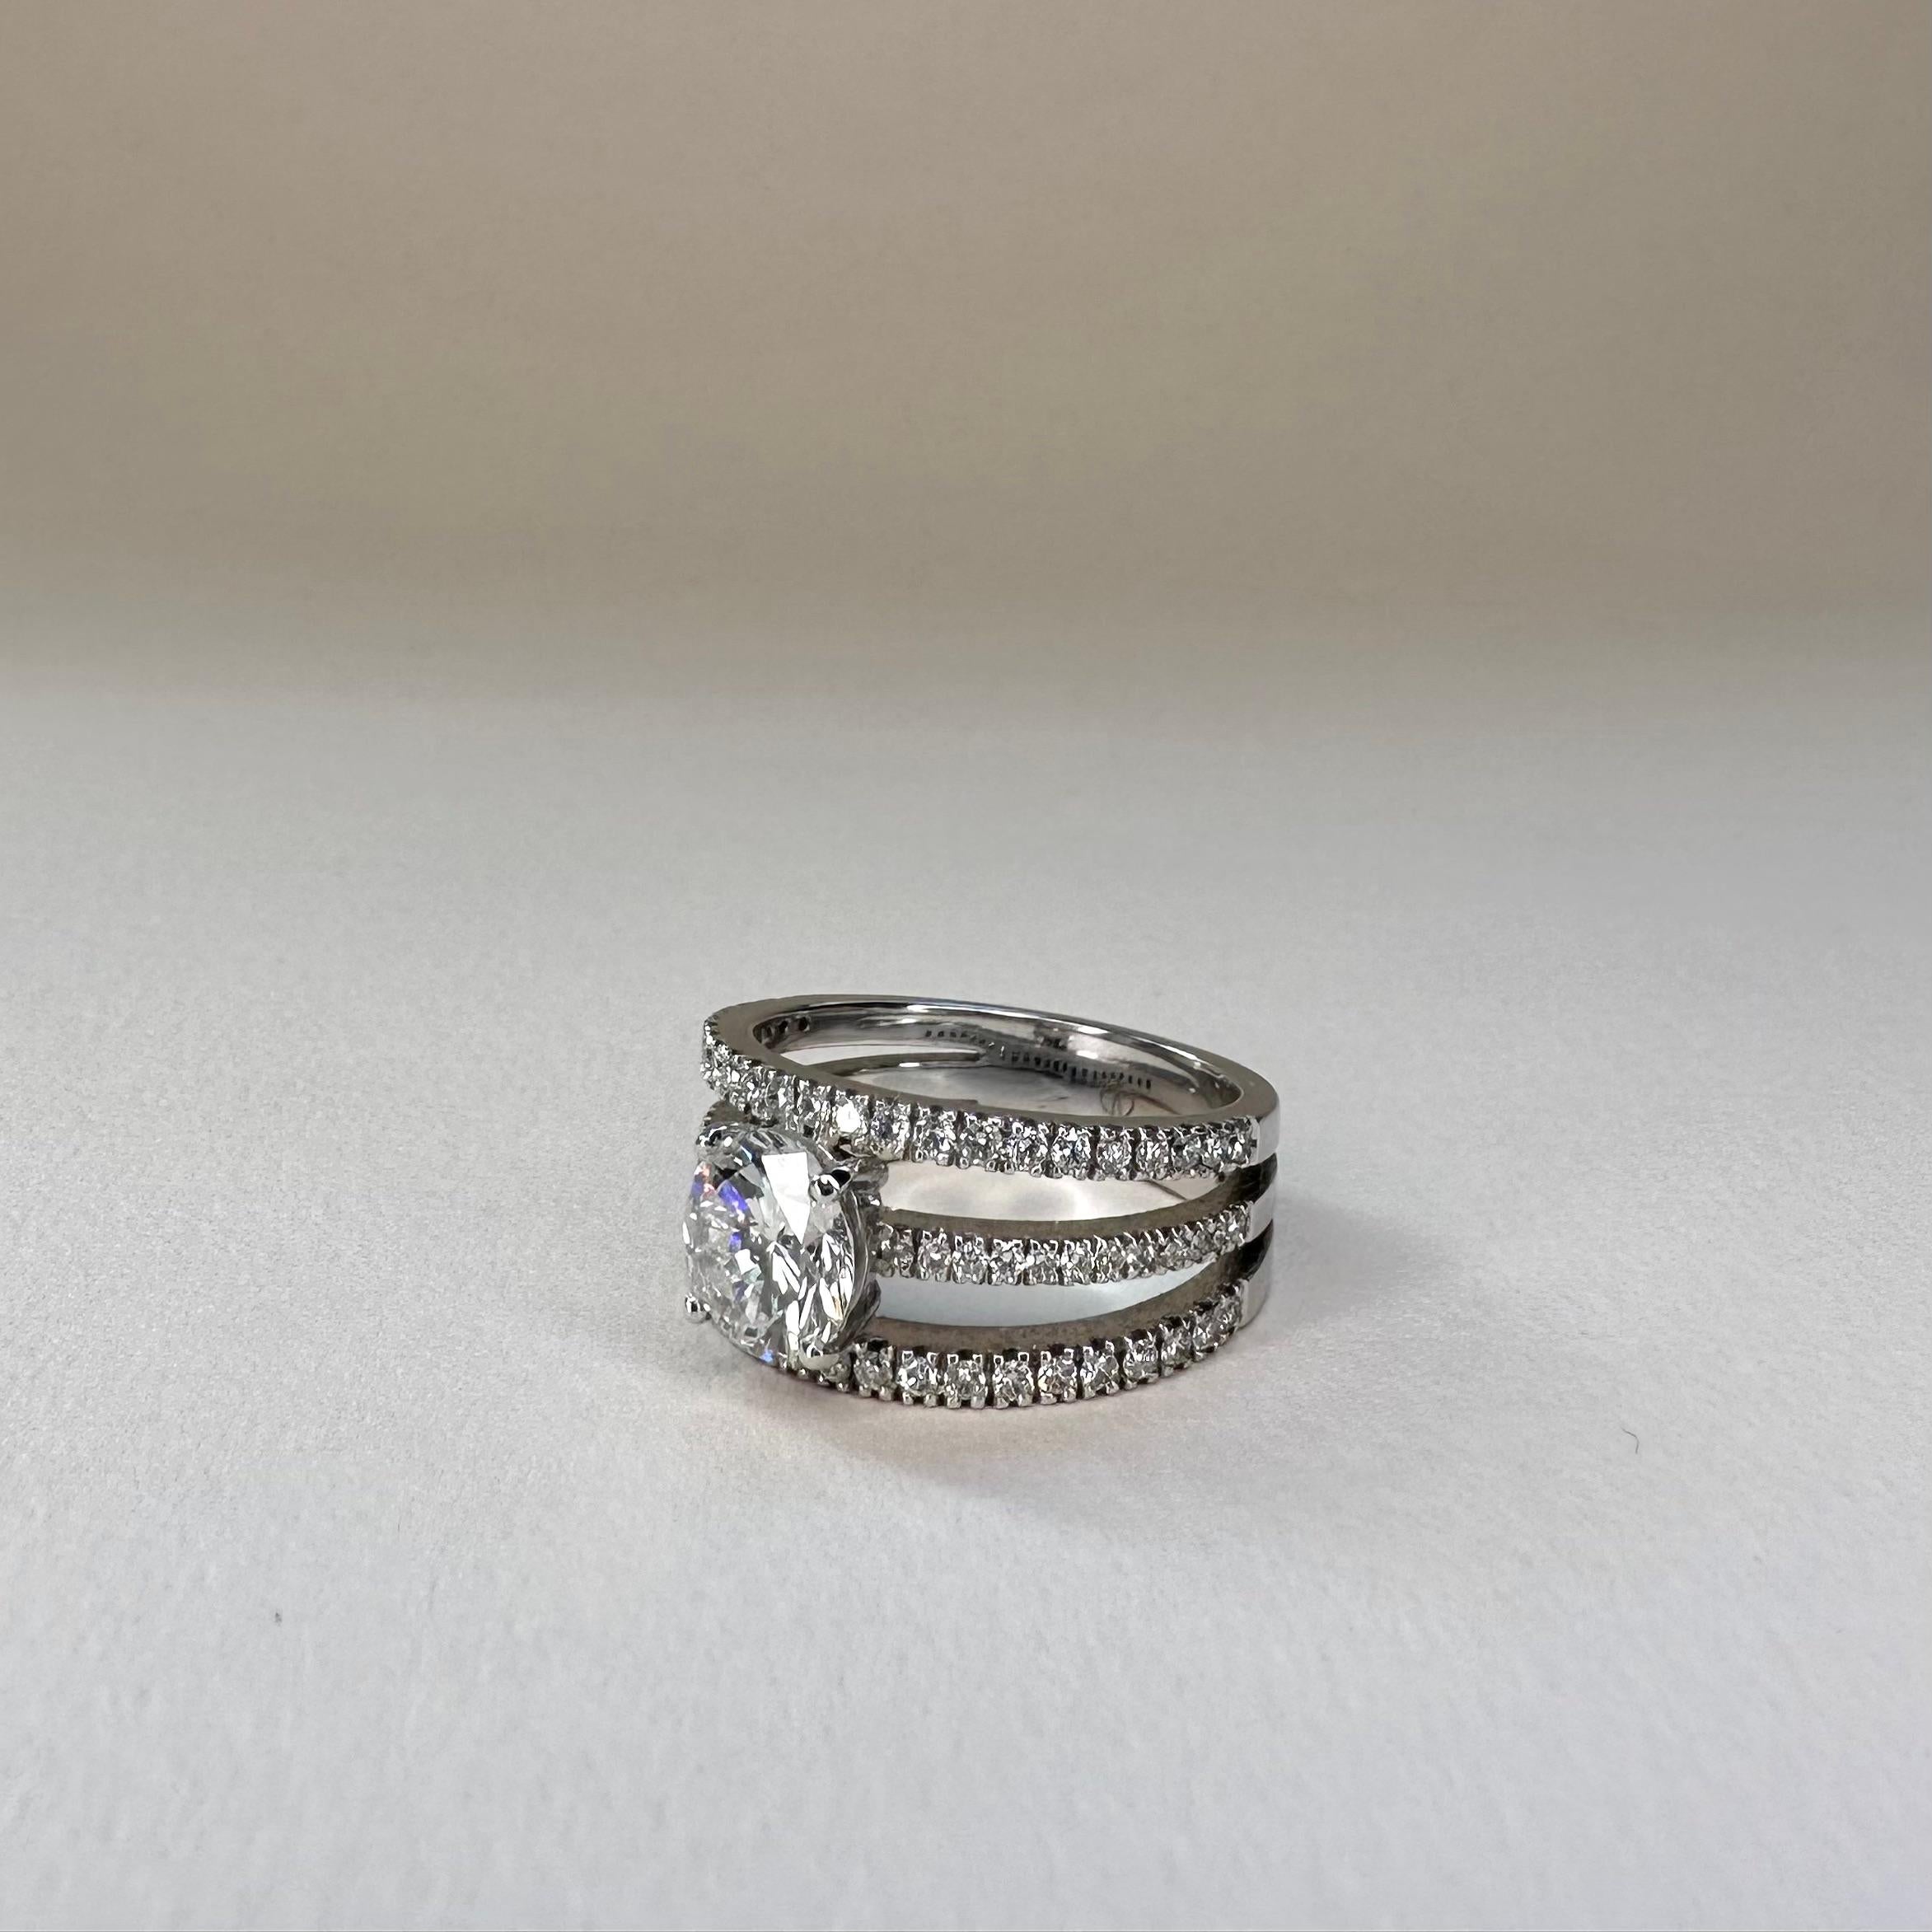 For Sale:  18k White Gold Triple Band Ring Carats GIA Certified Ct Diamond set with 5